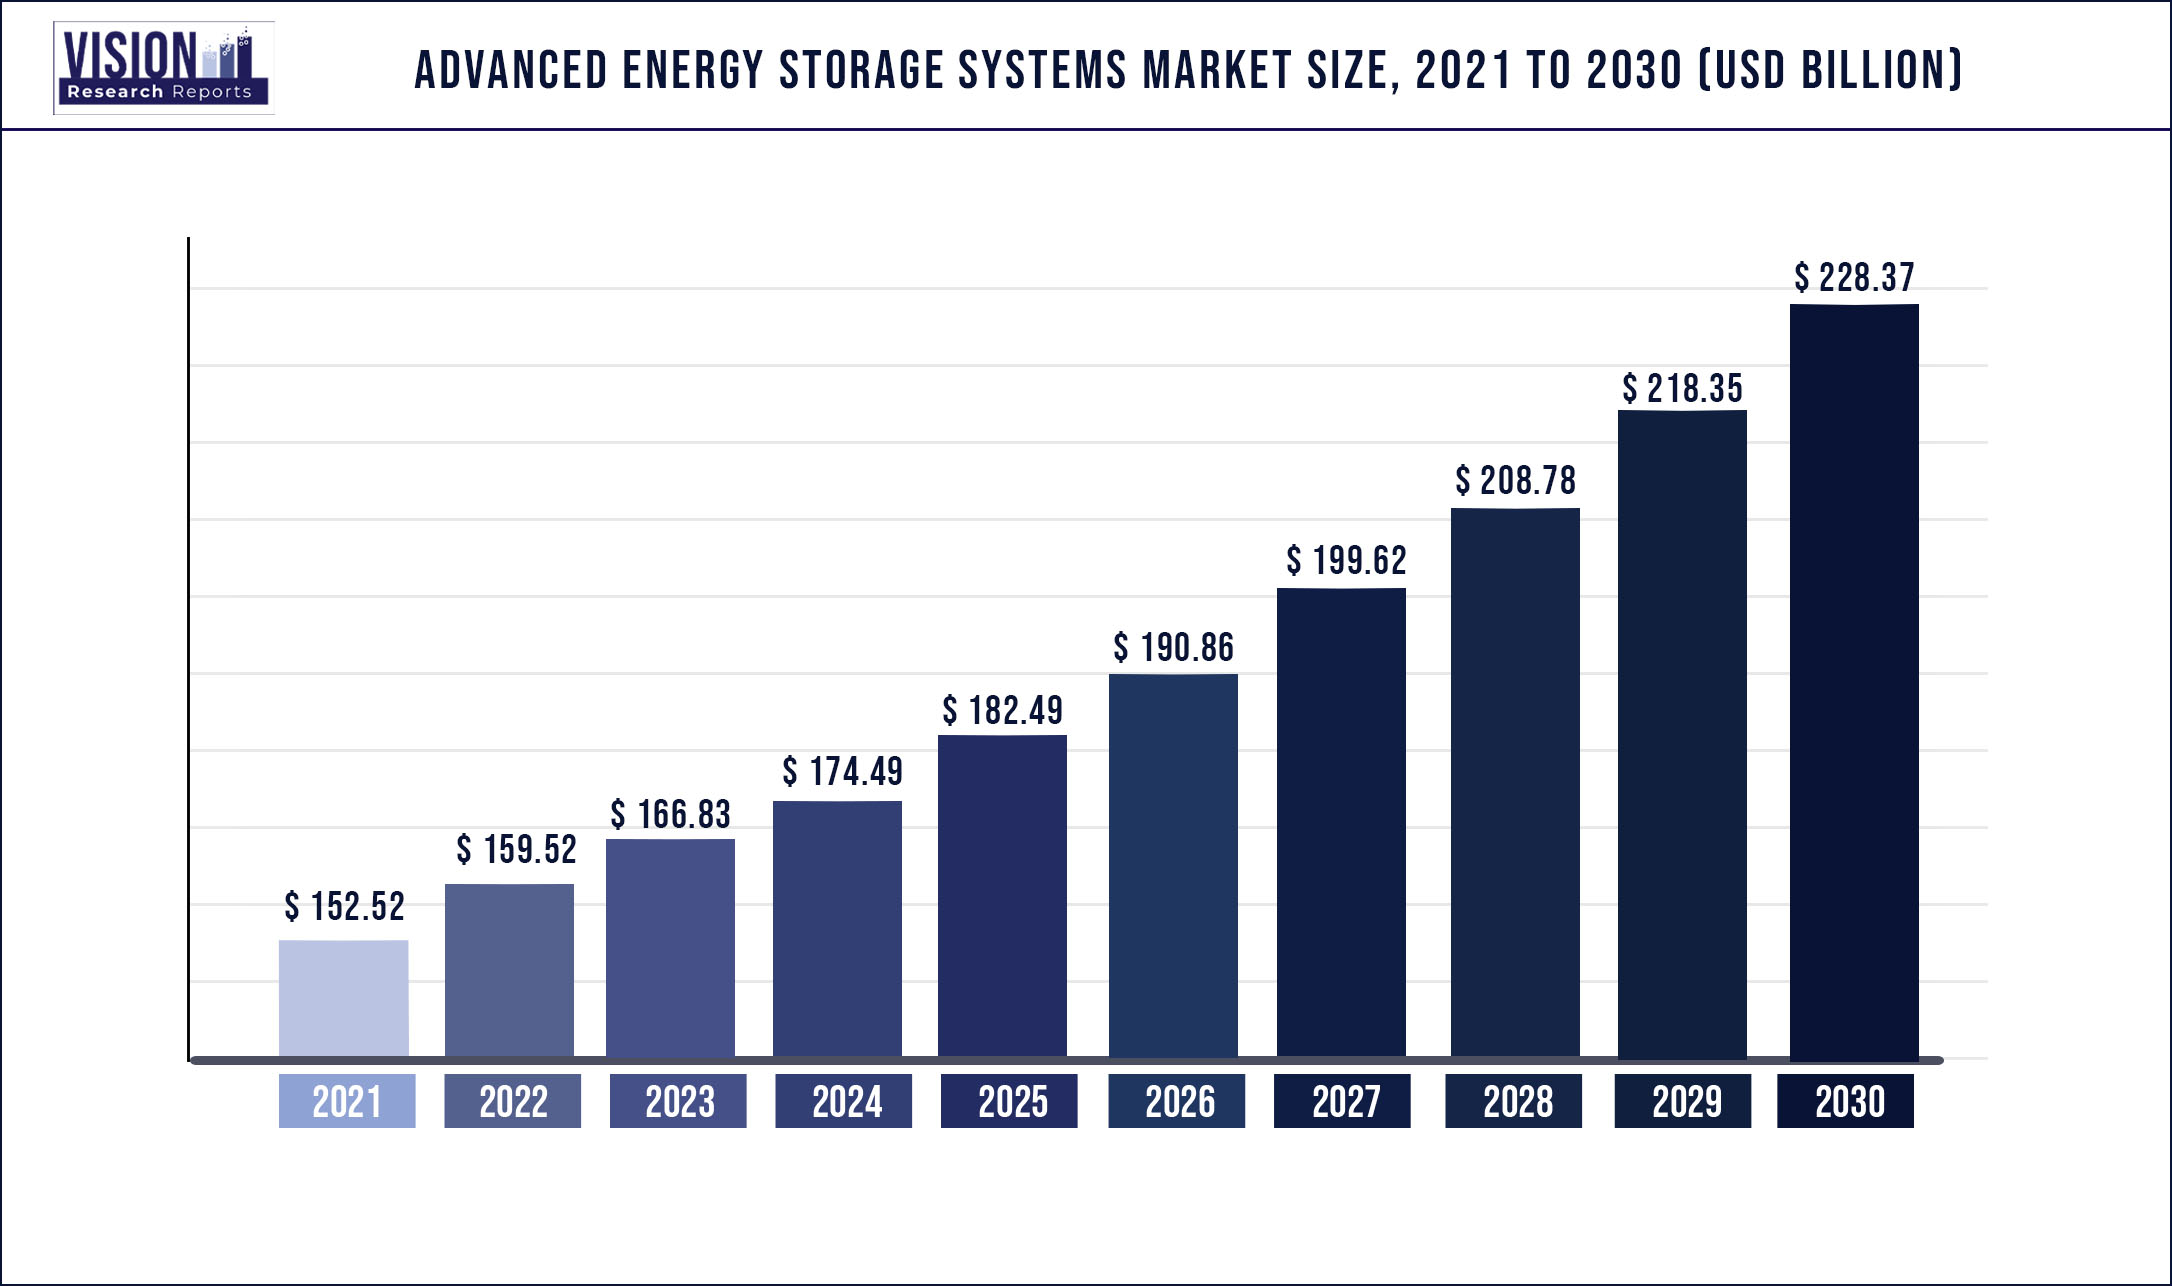 Advanced Energy Storage Systems Market Size 2021 to 2030